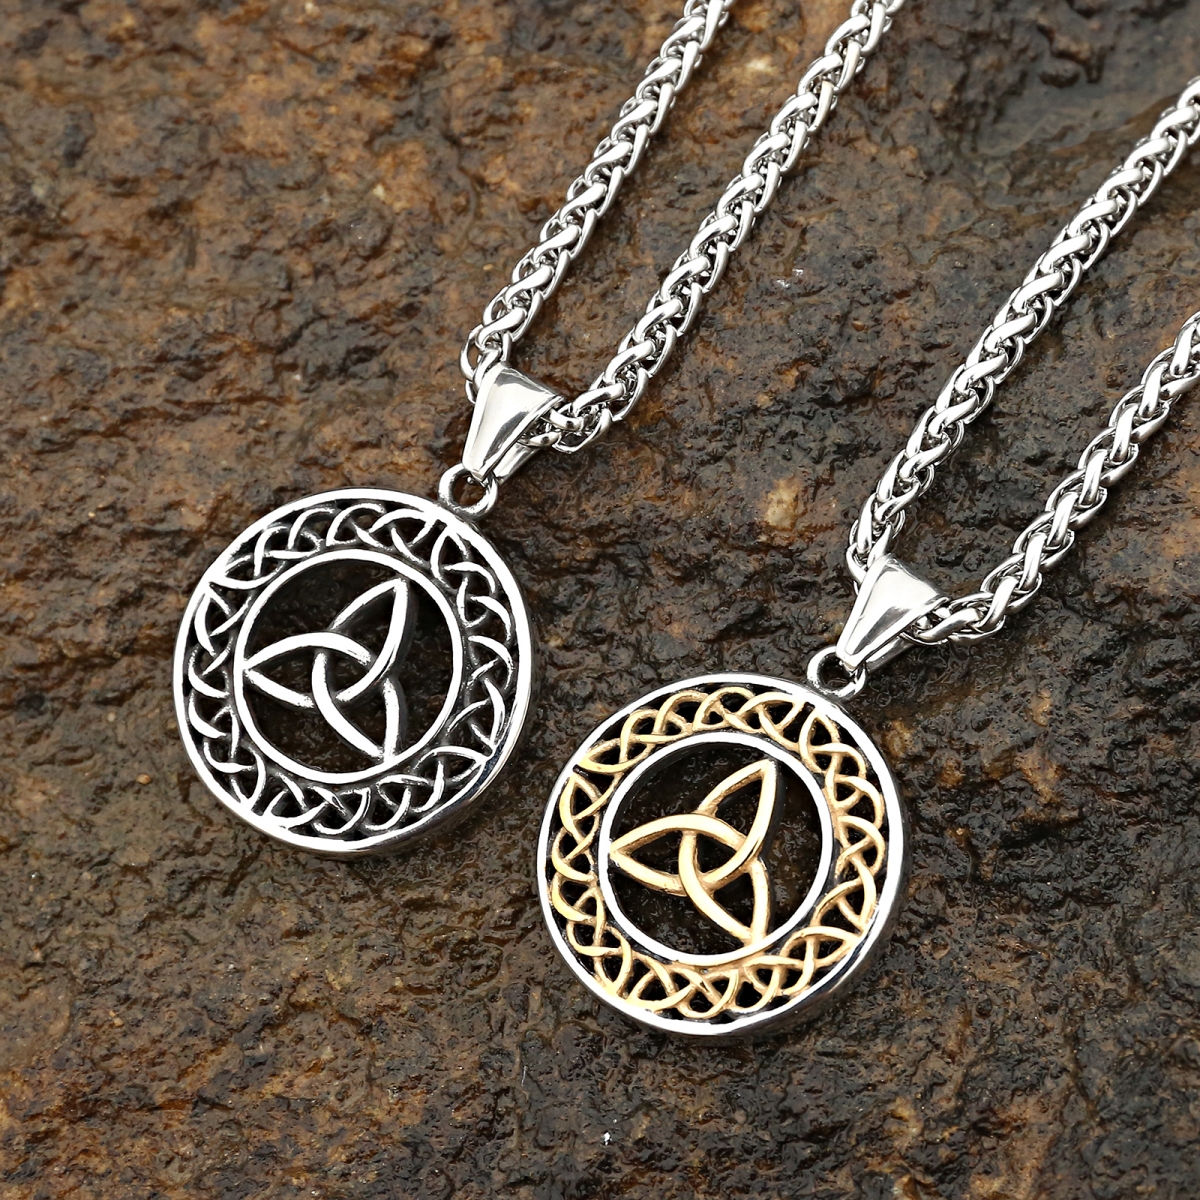 Celtic Knot Necklace US$2.9/PC-NORSECOLLECTION- Viking Jewelry,Viking Necklace,Viking Bracelet,Viking Rings,Viking Mugs,Viking Accessories,Viking Crafts